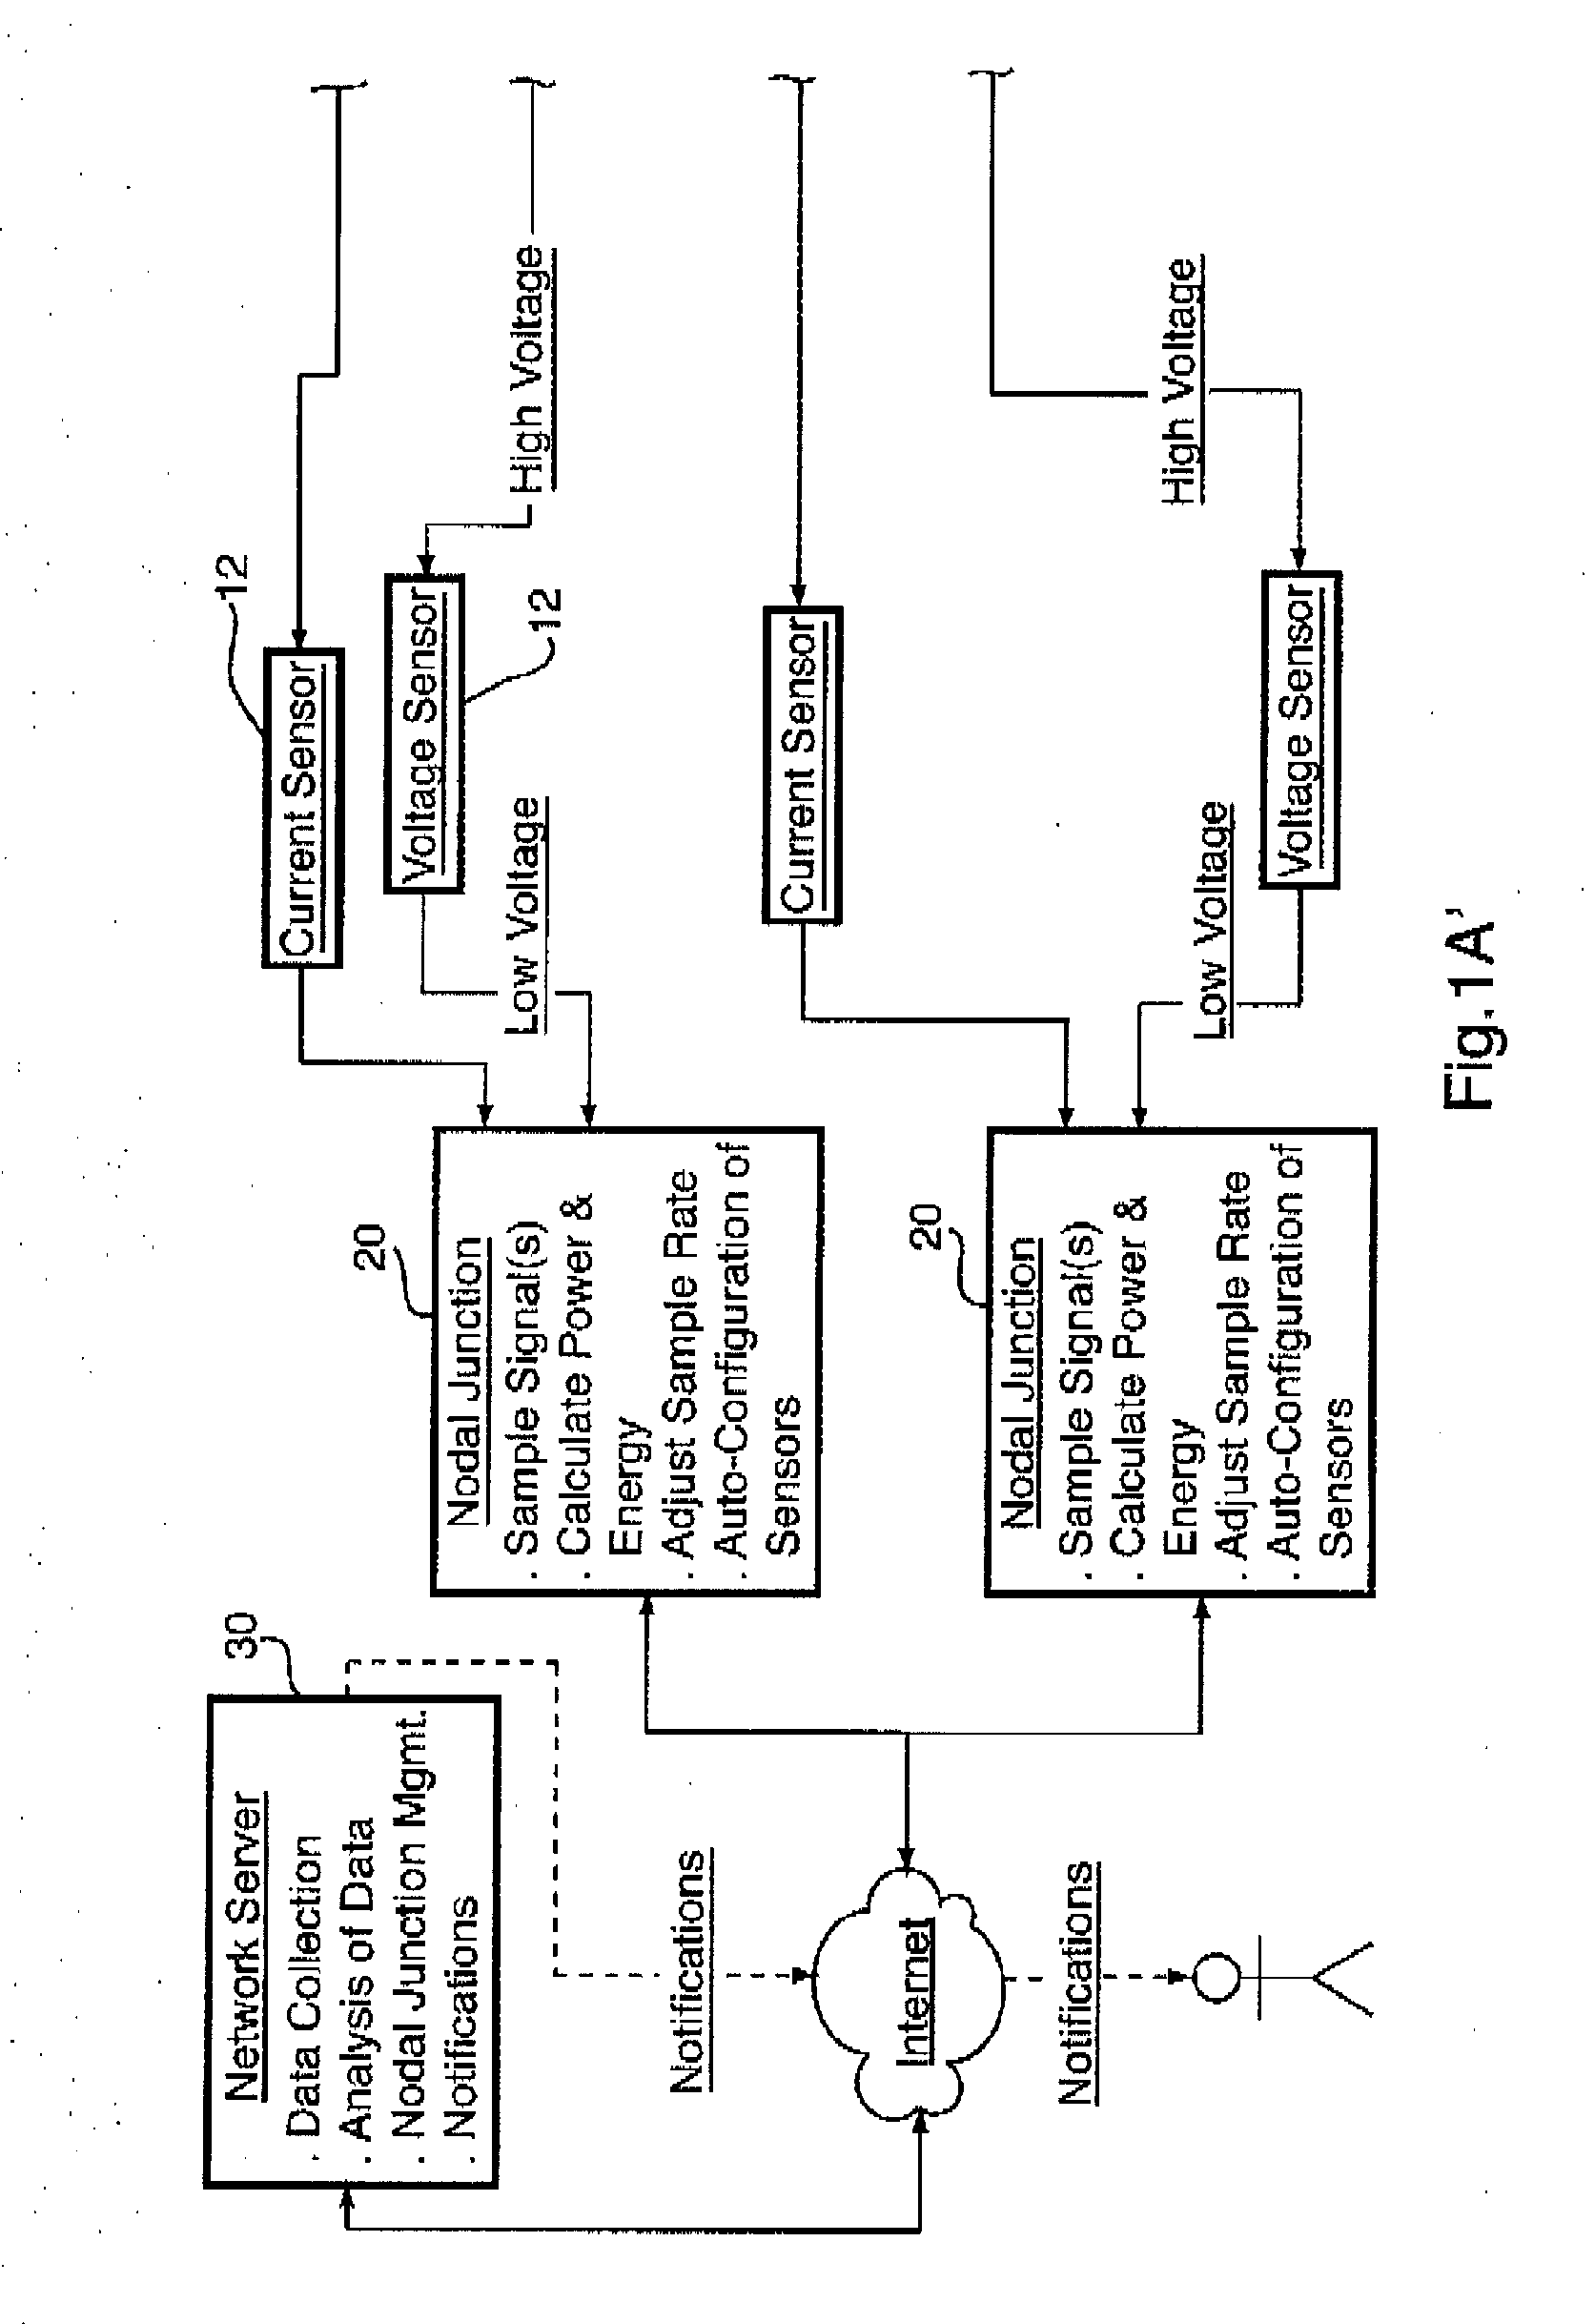 System and method for monitoring an electrical network